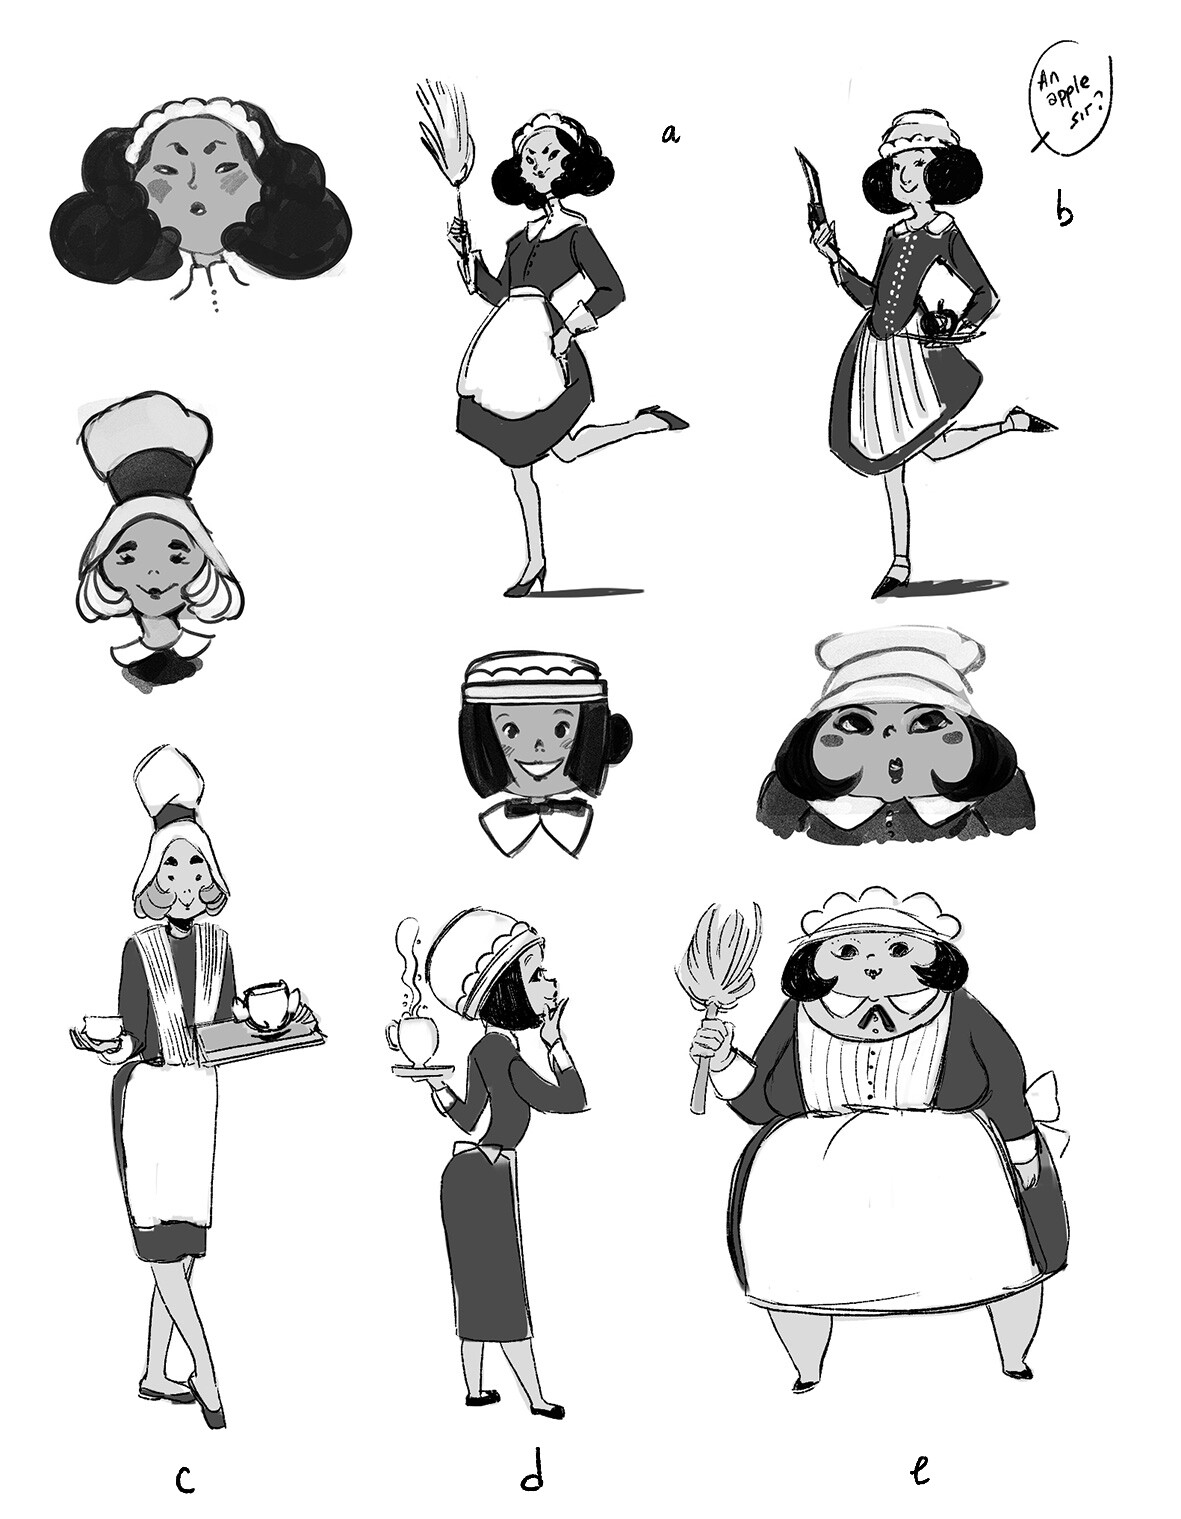 Maid costumes and characters studies